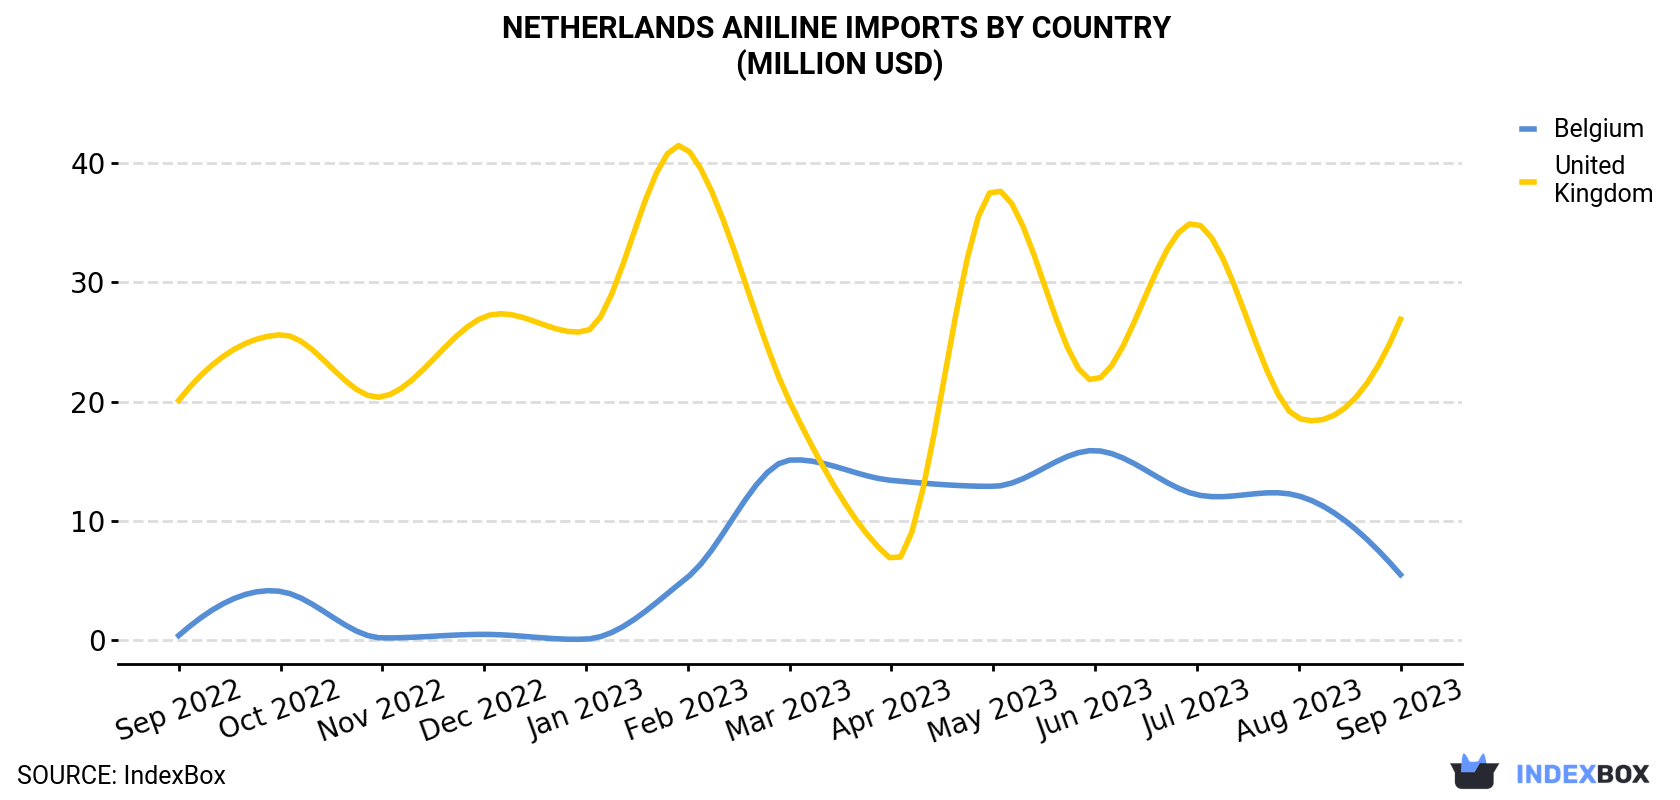 Netherlands Aniline Imports By Country (Million USD)